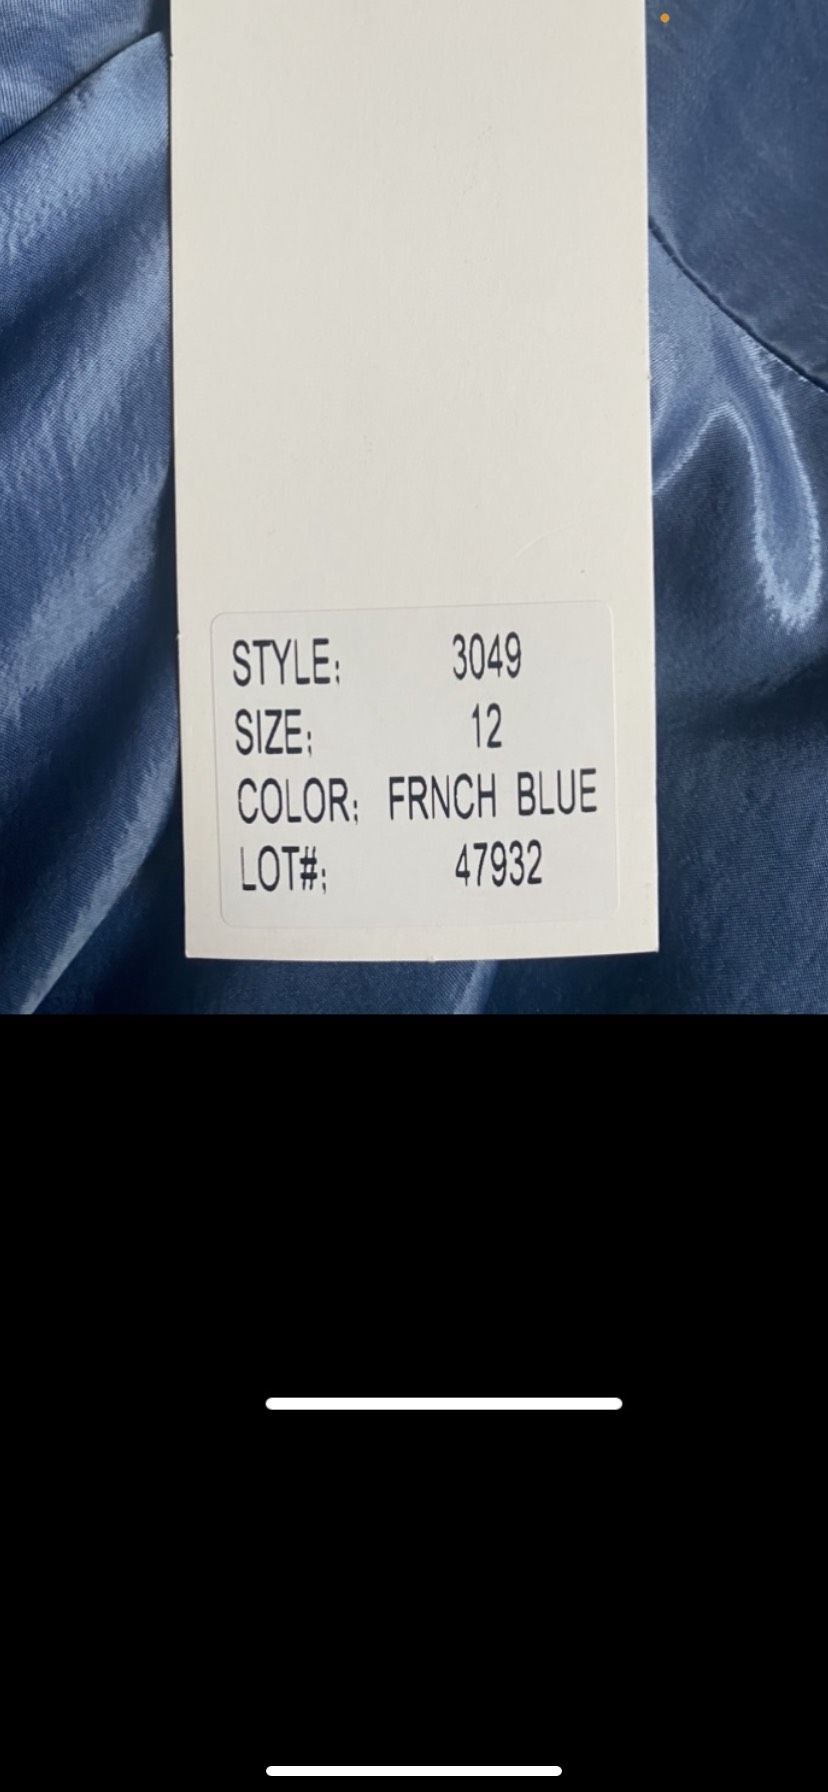 Alyce Paris Size 12 Prom Blue A-line Dress on Queenly